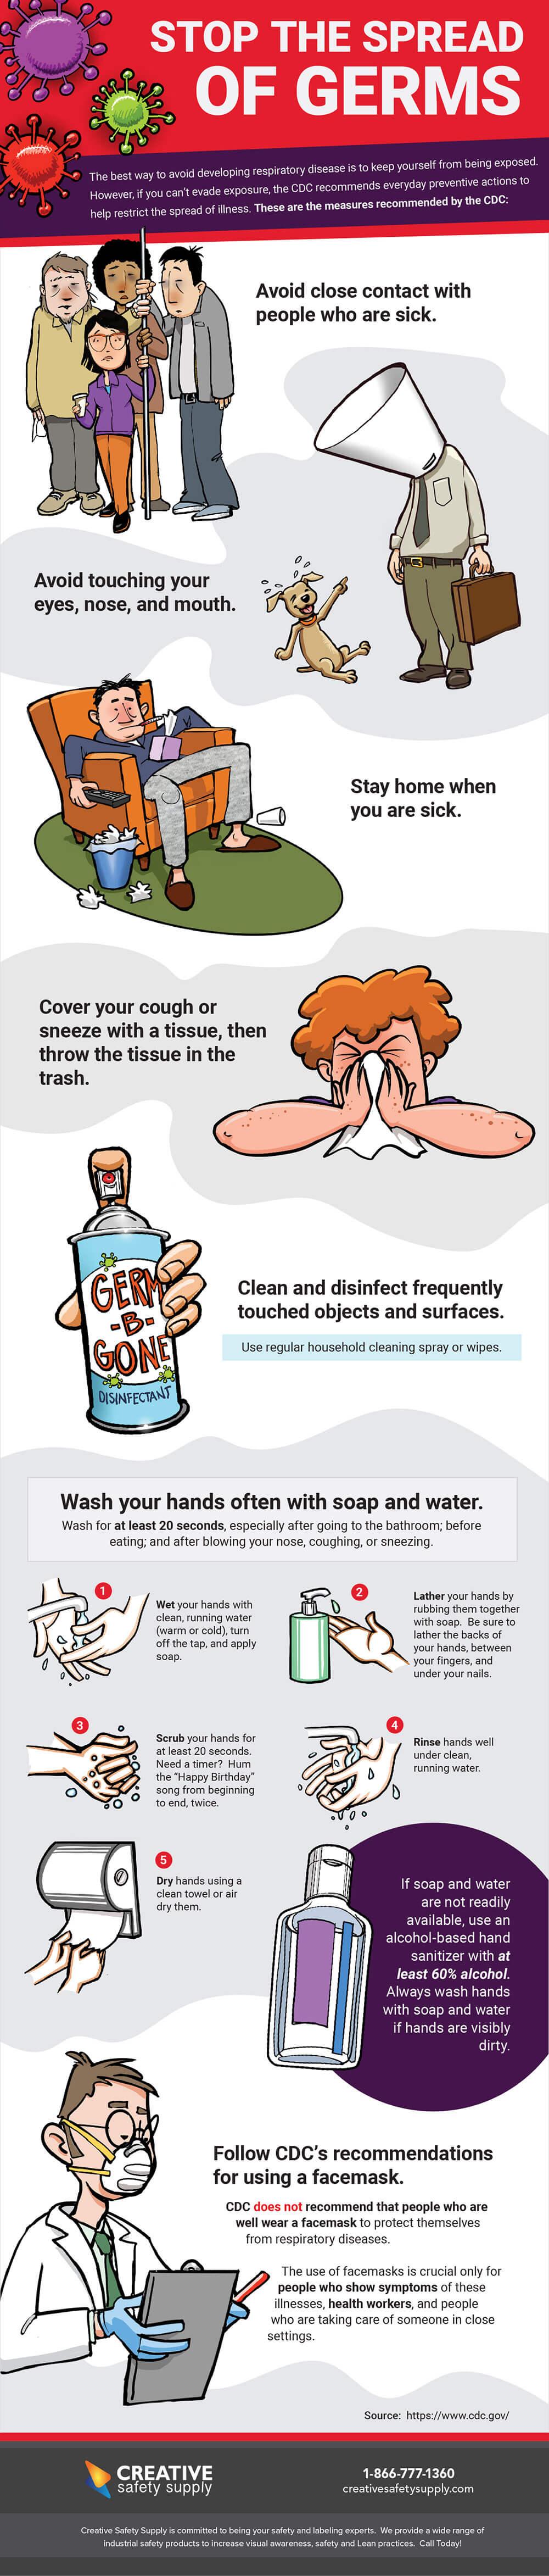 COVID 19: How Can You Stop The Germs From Spreading? - Infographic